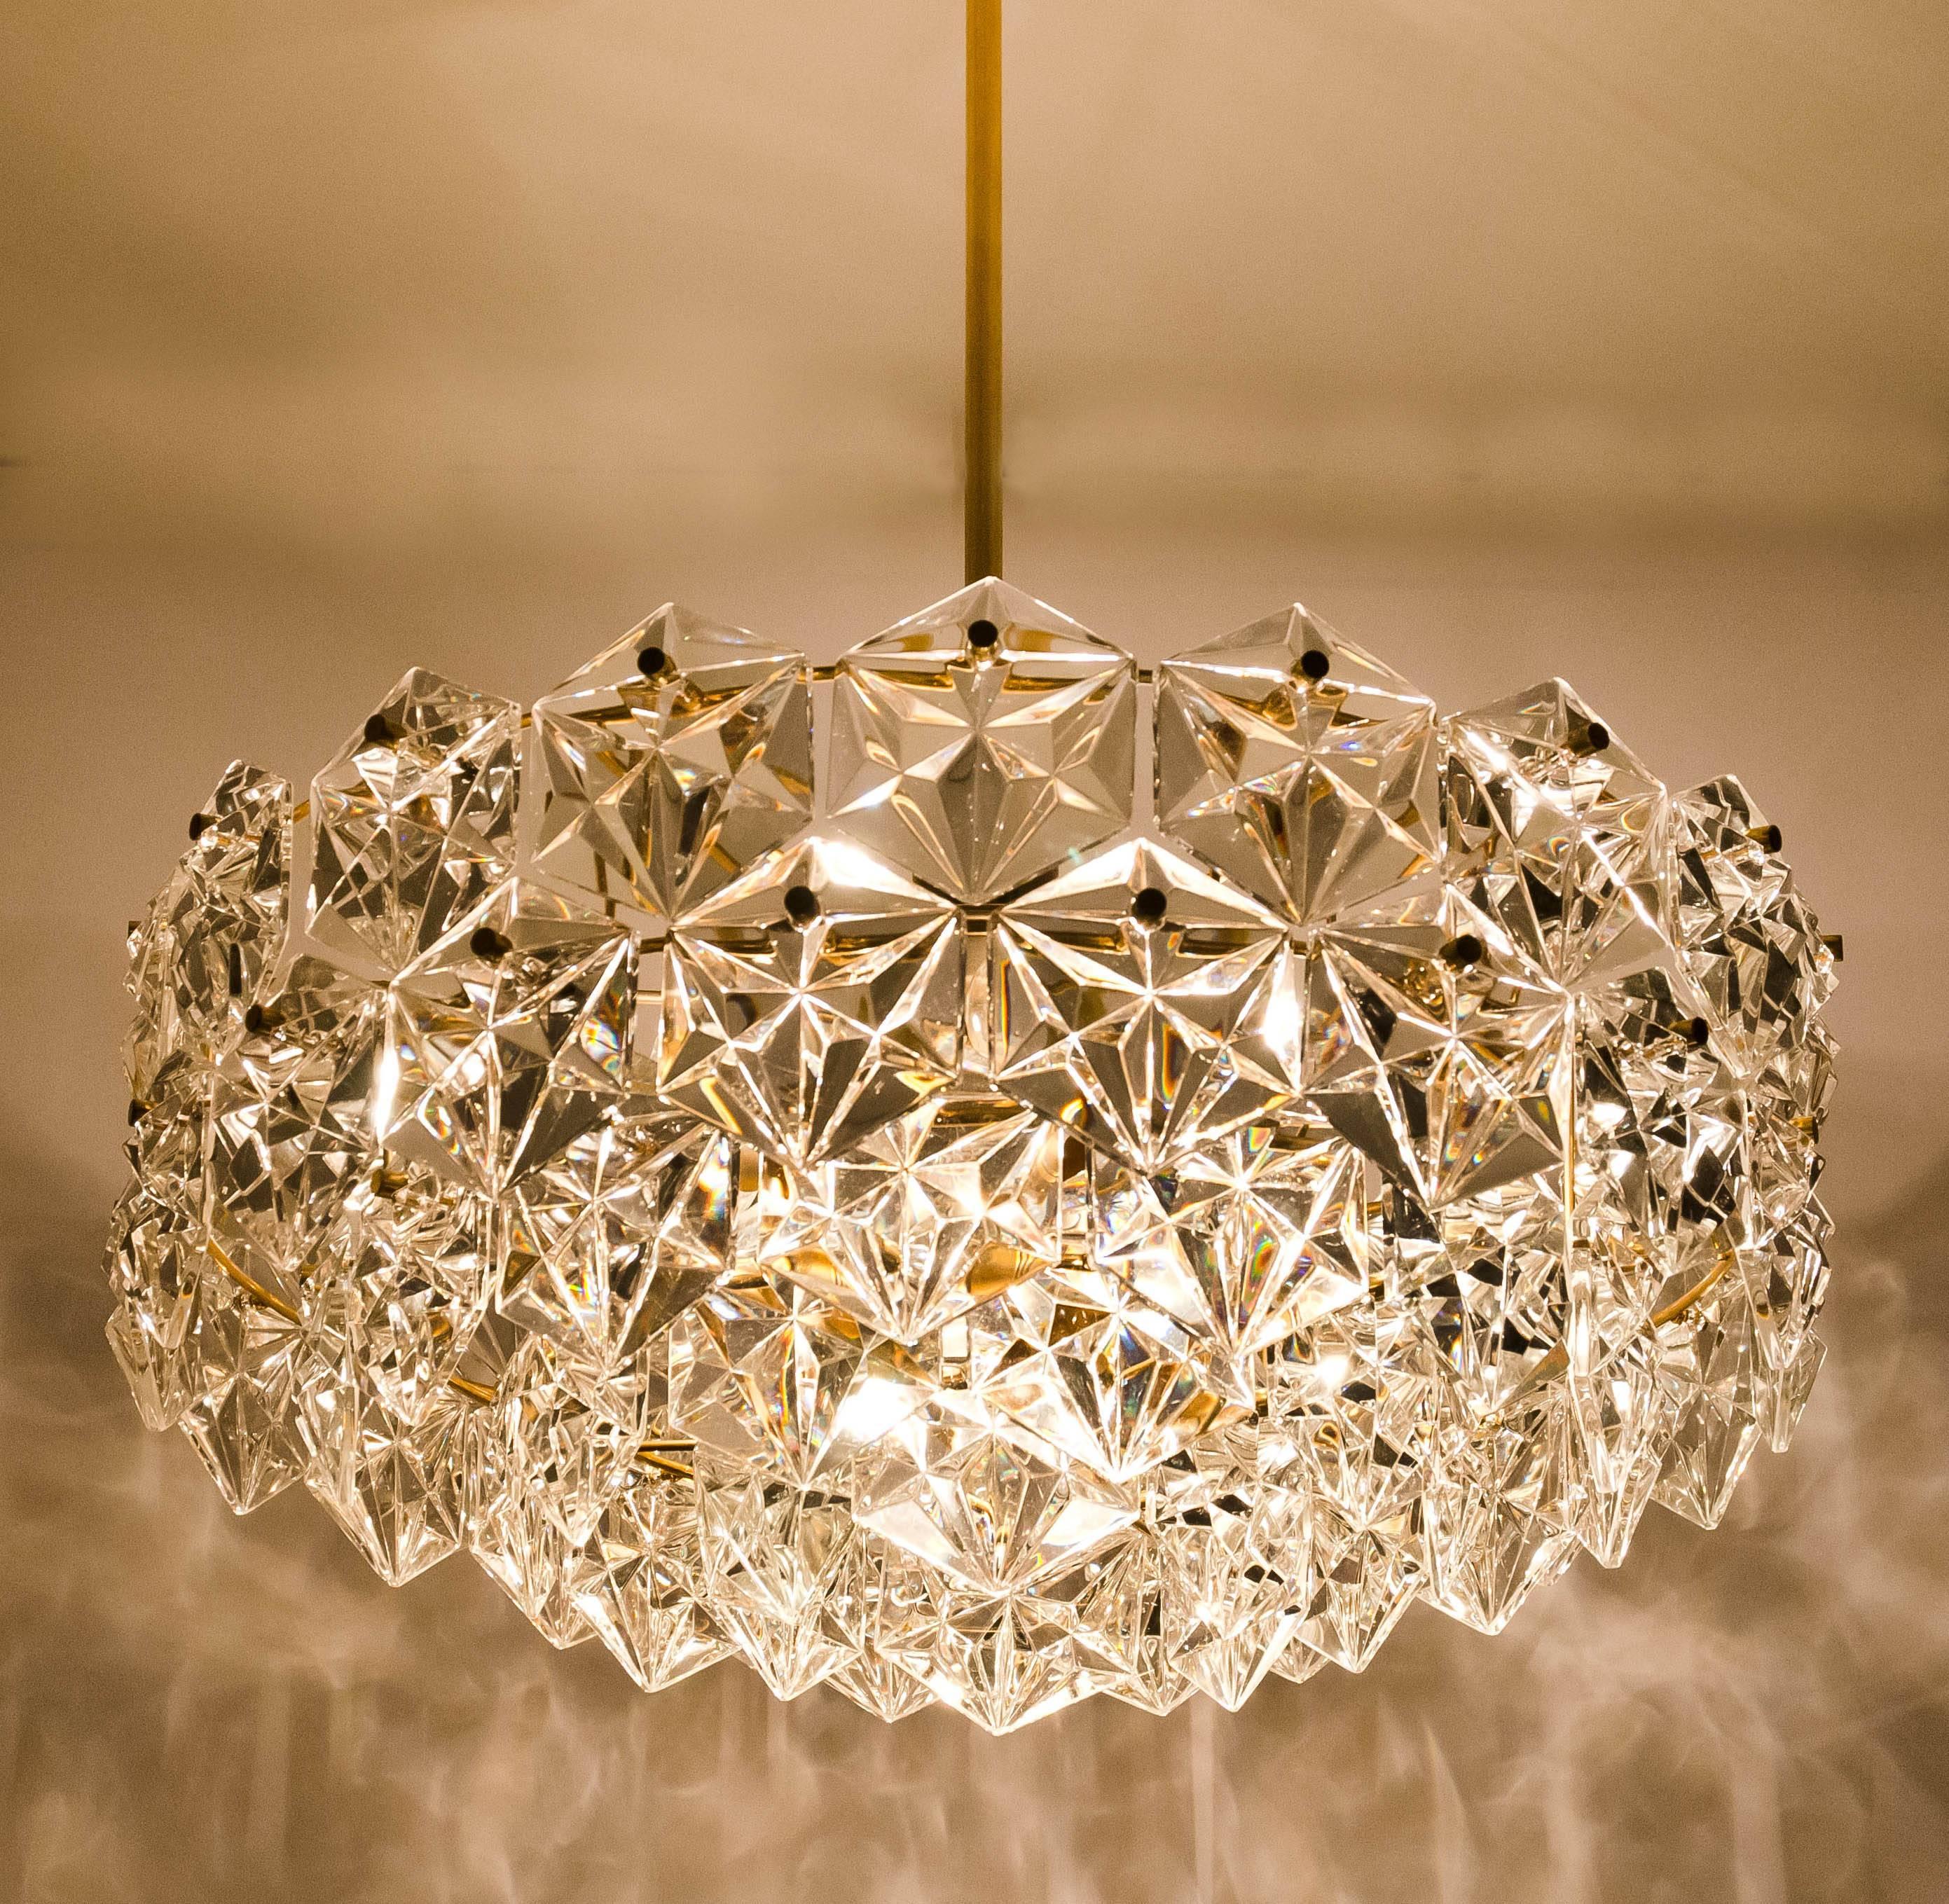 This modernist design chandeliers were designed by the Kinkeldey design team during the 1970s, and manufactured in Germany. A very Elegant Kinkeldey chandelier, it is comfortable with all Décor periods. The crystals are meticulously cut in such a